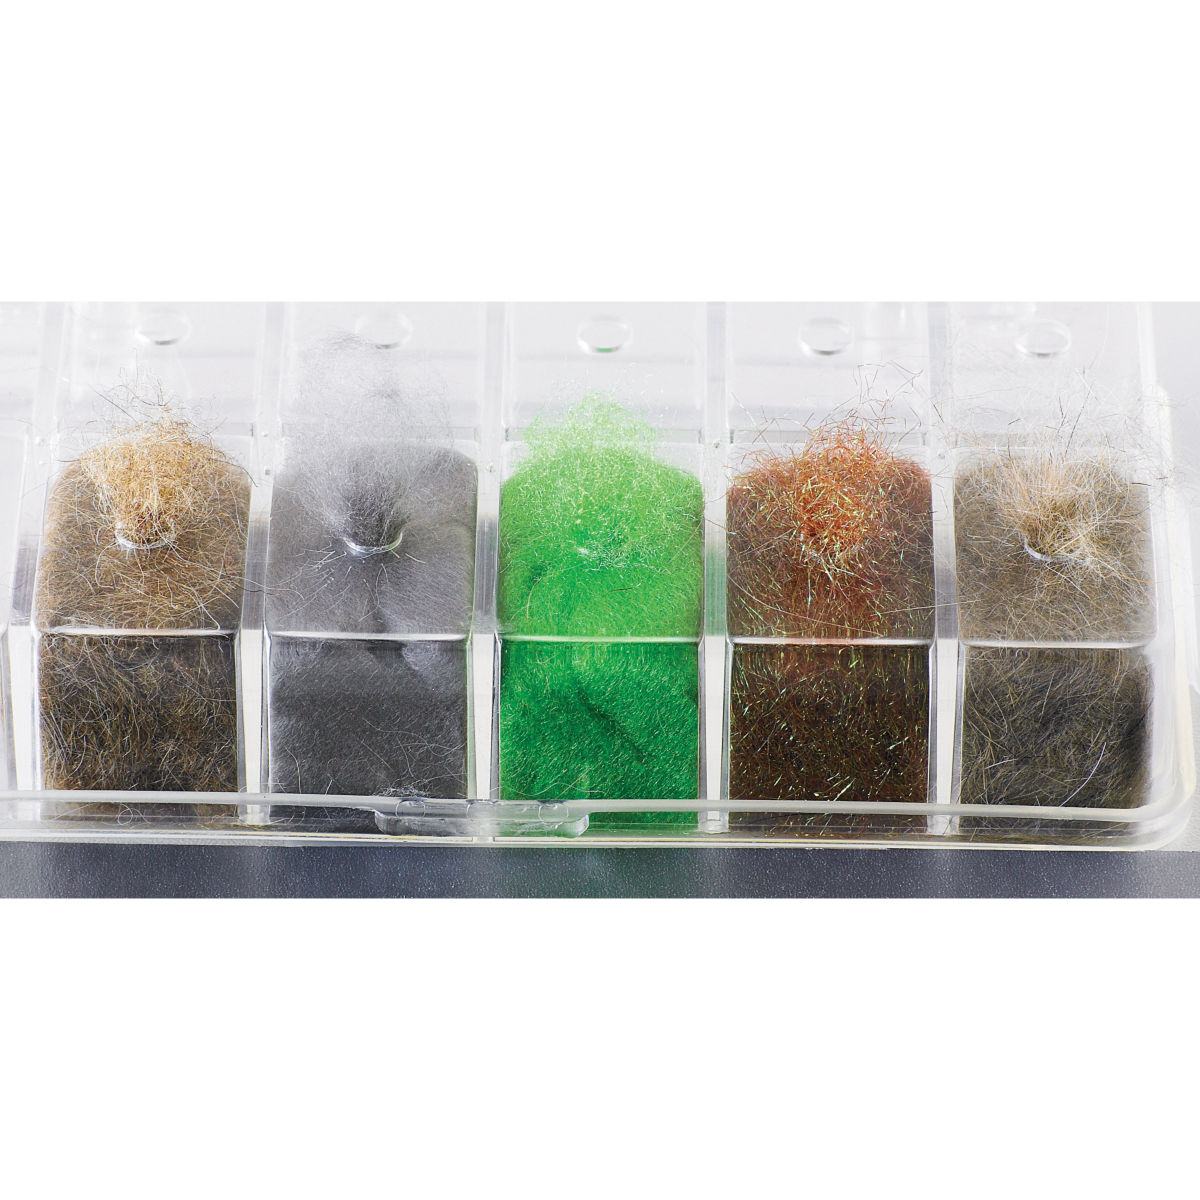 Antron Dubbing Dispenser Box Fly Tying Natural colors  Worldwide! The bug box 